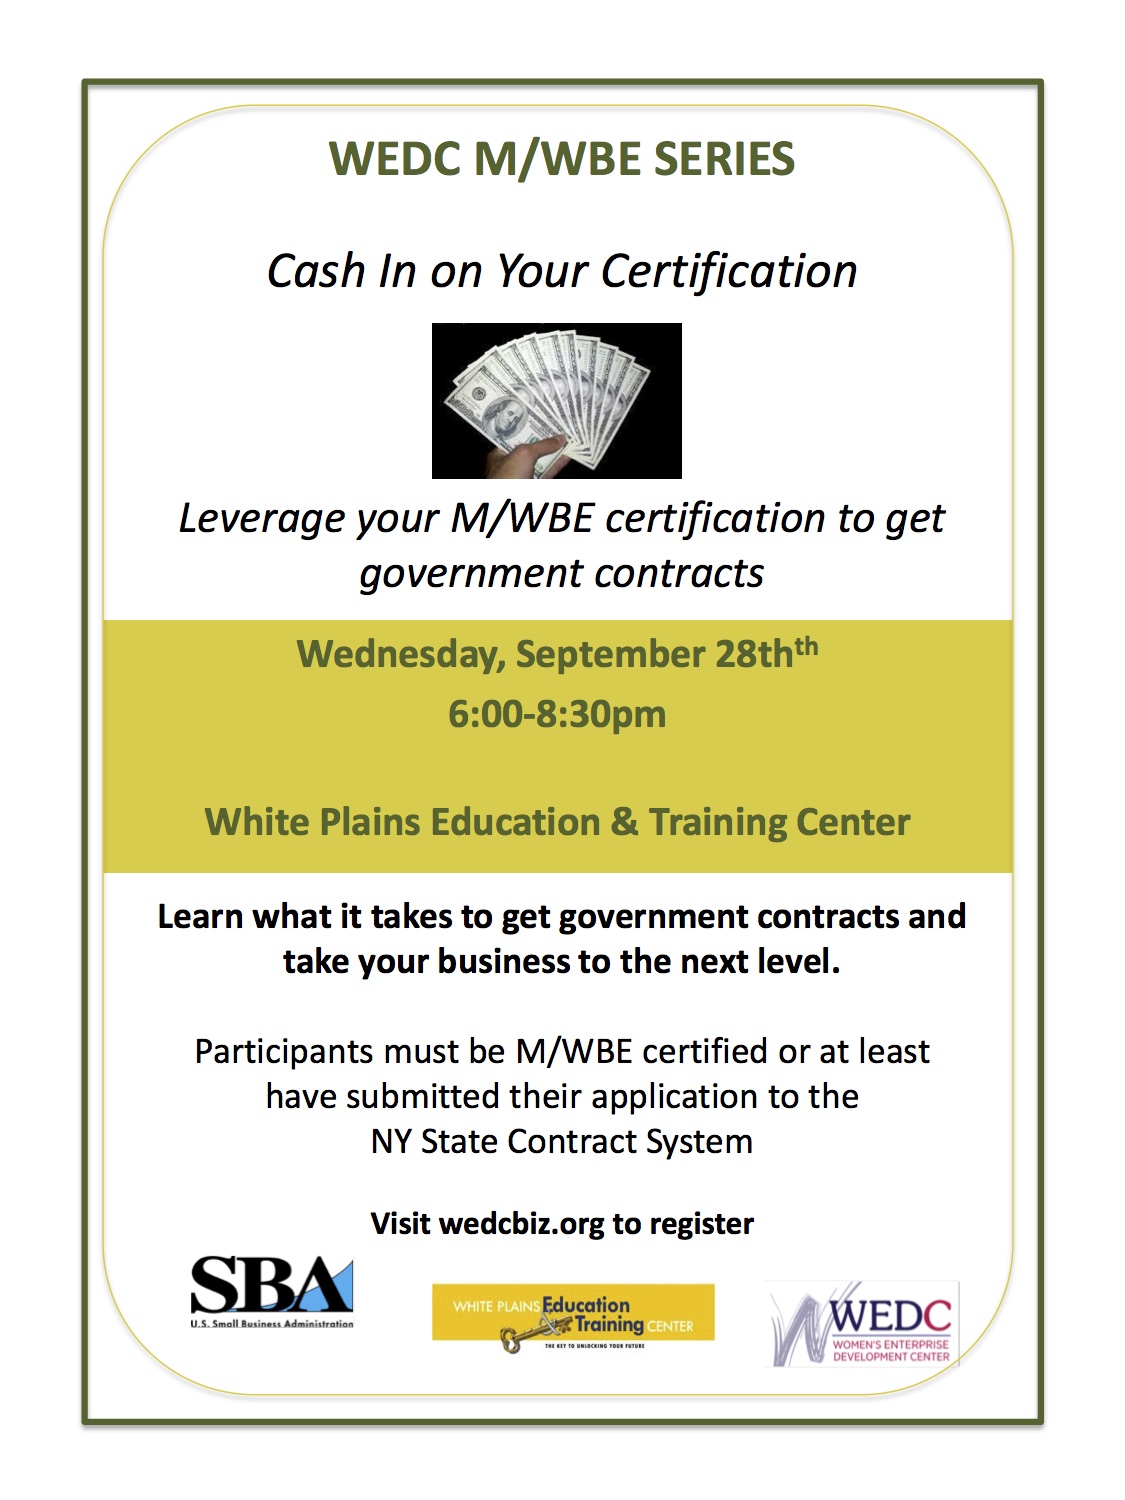 cashin-on-your-mwbe-certification